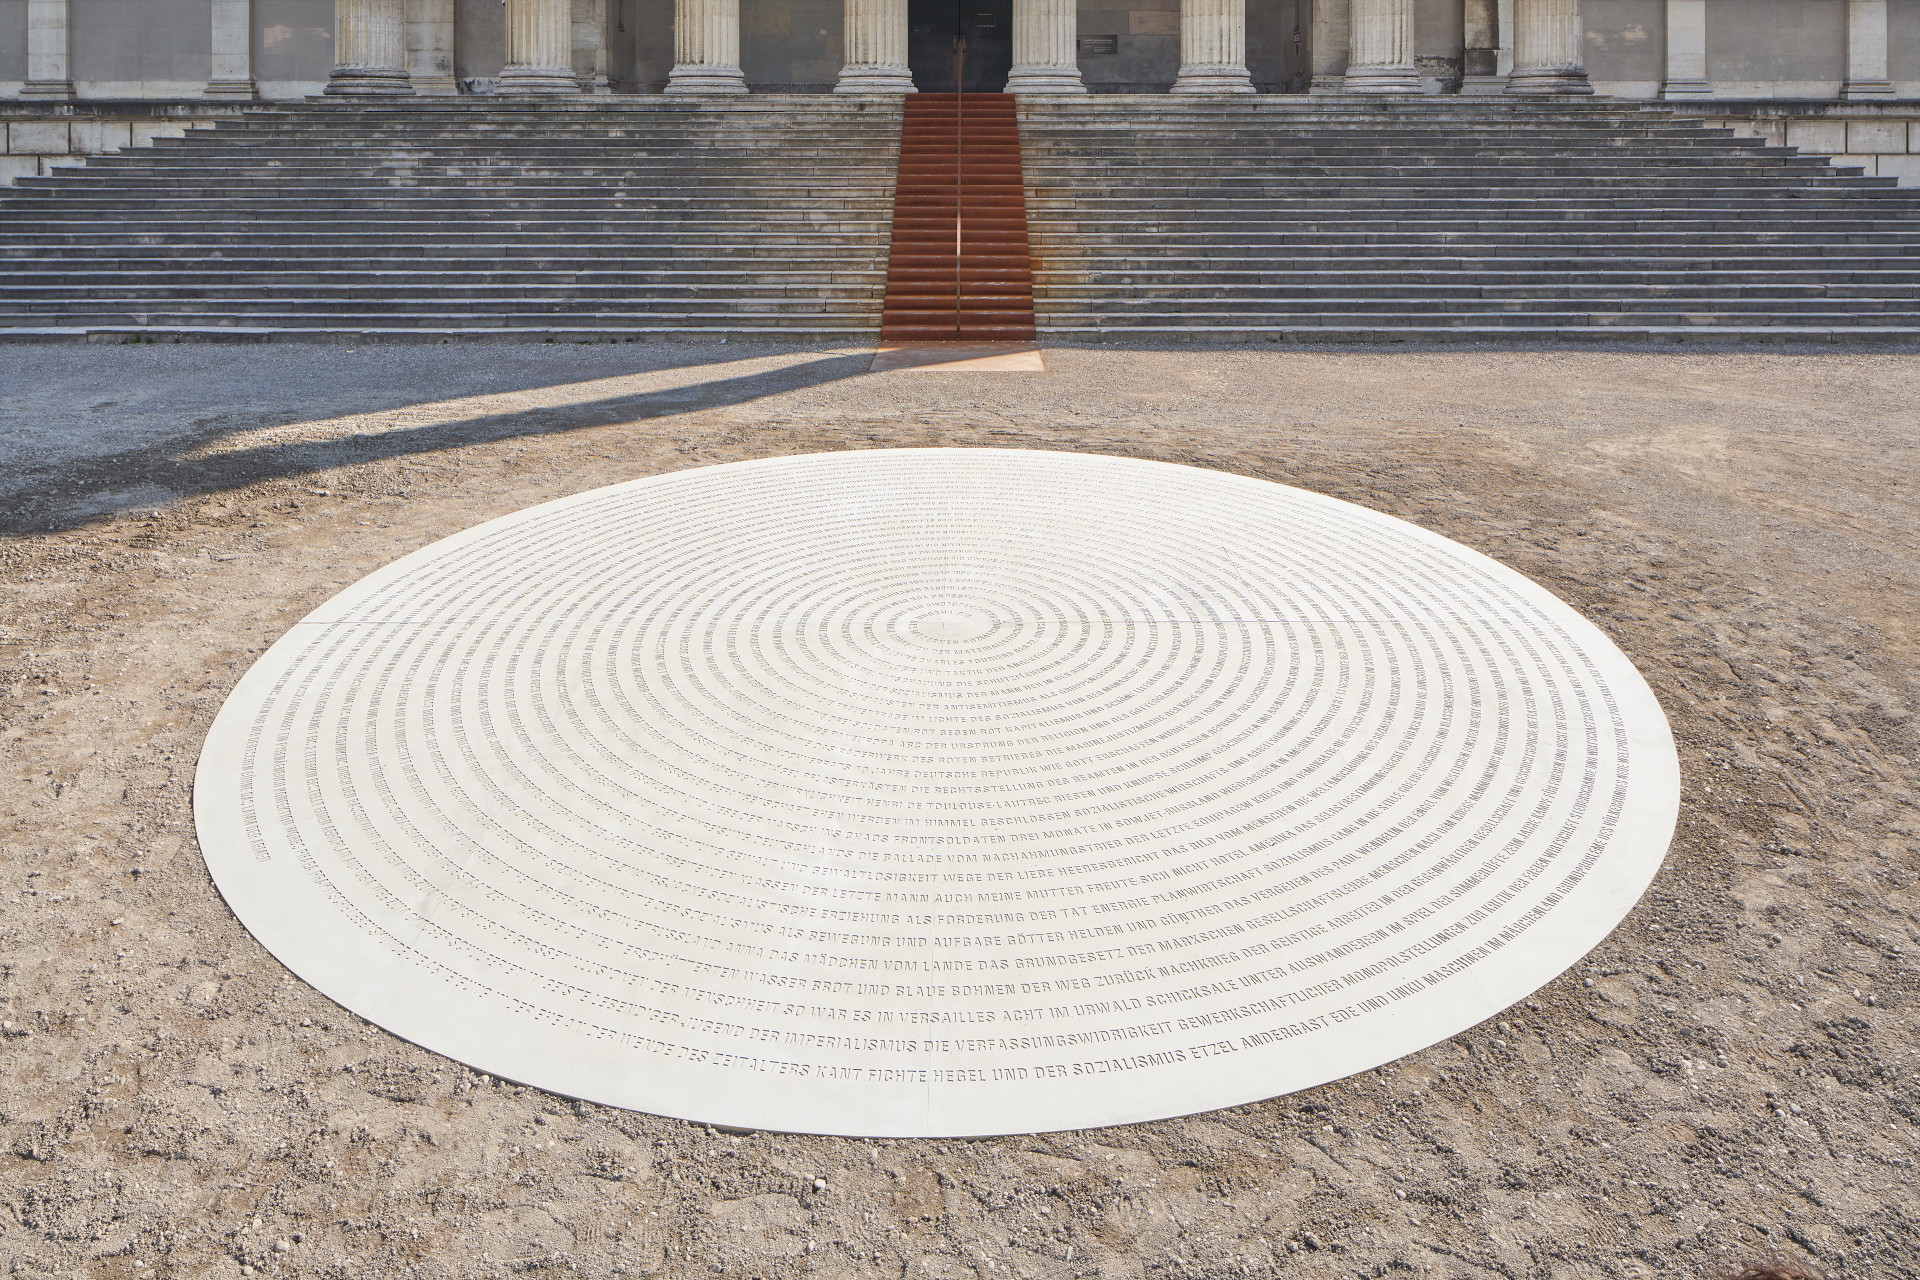 A round plate has been set in the ground ion which the titles of the burned books can be read in a spiral.